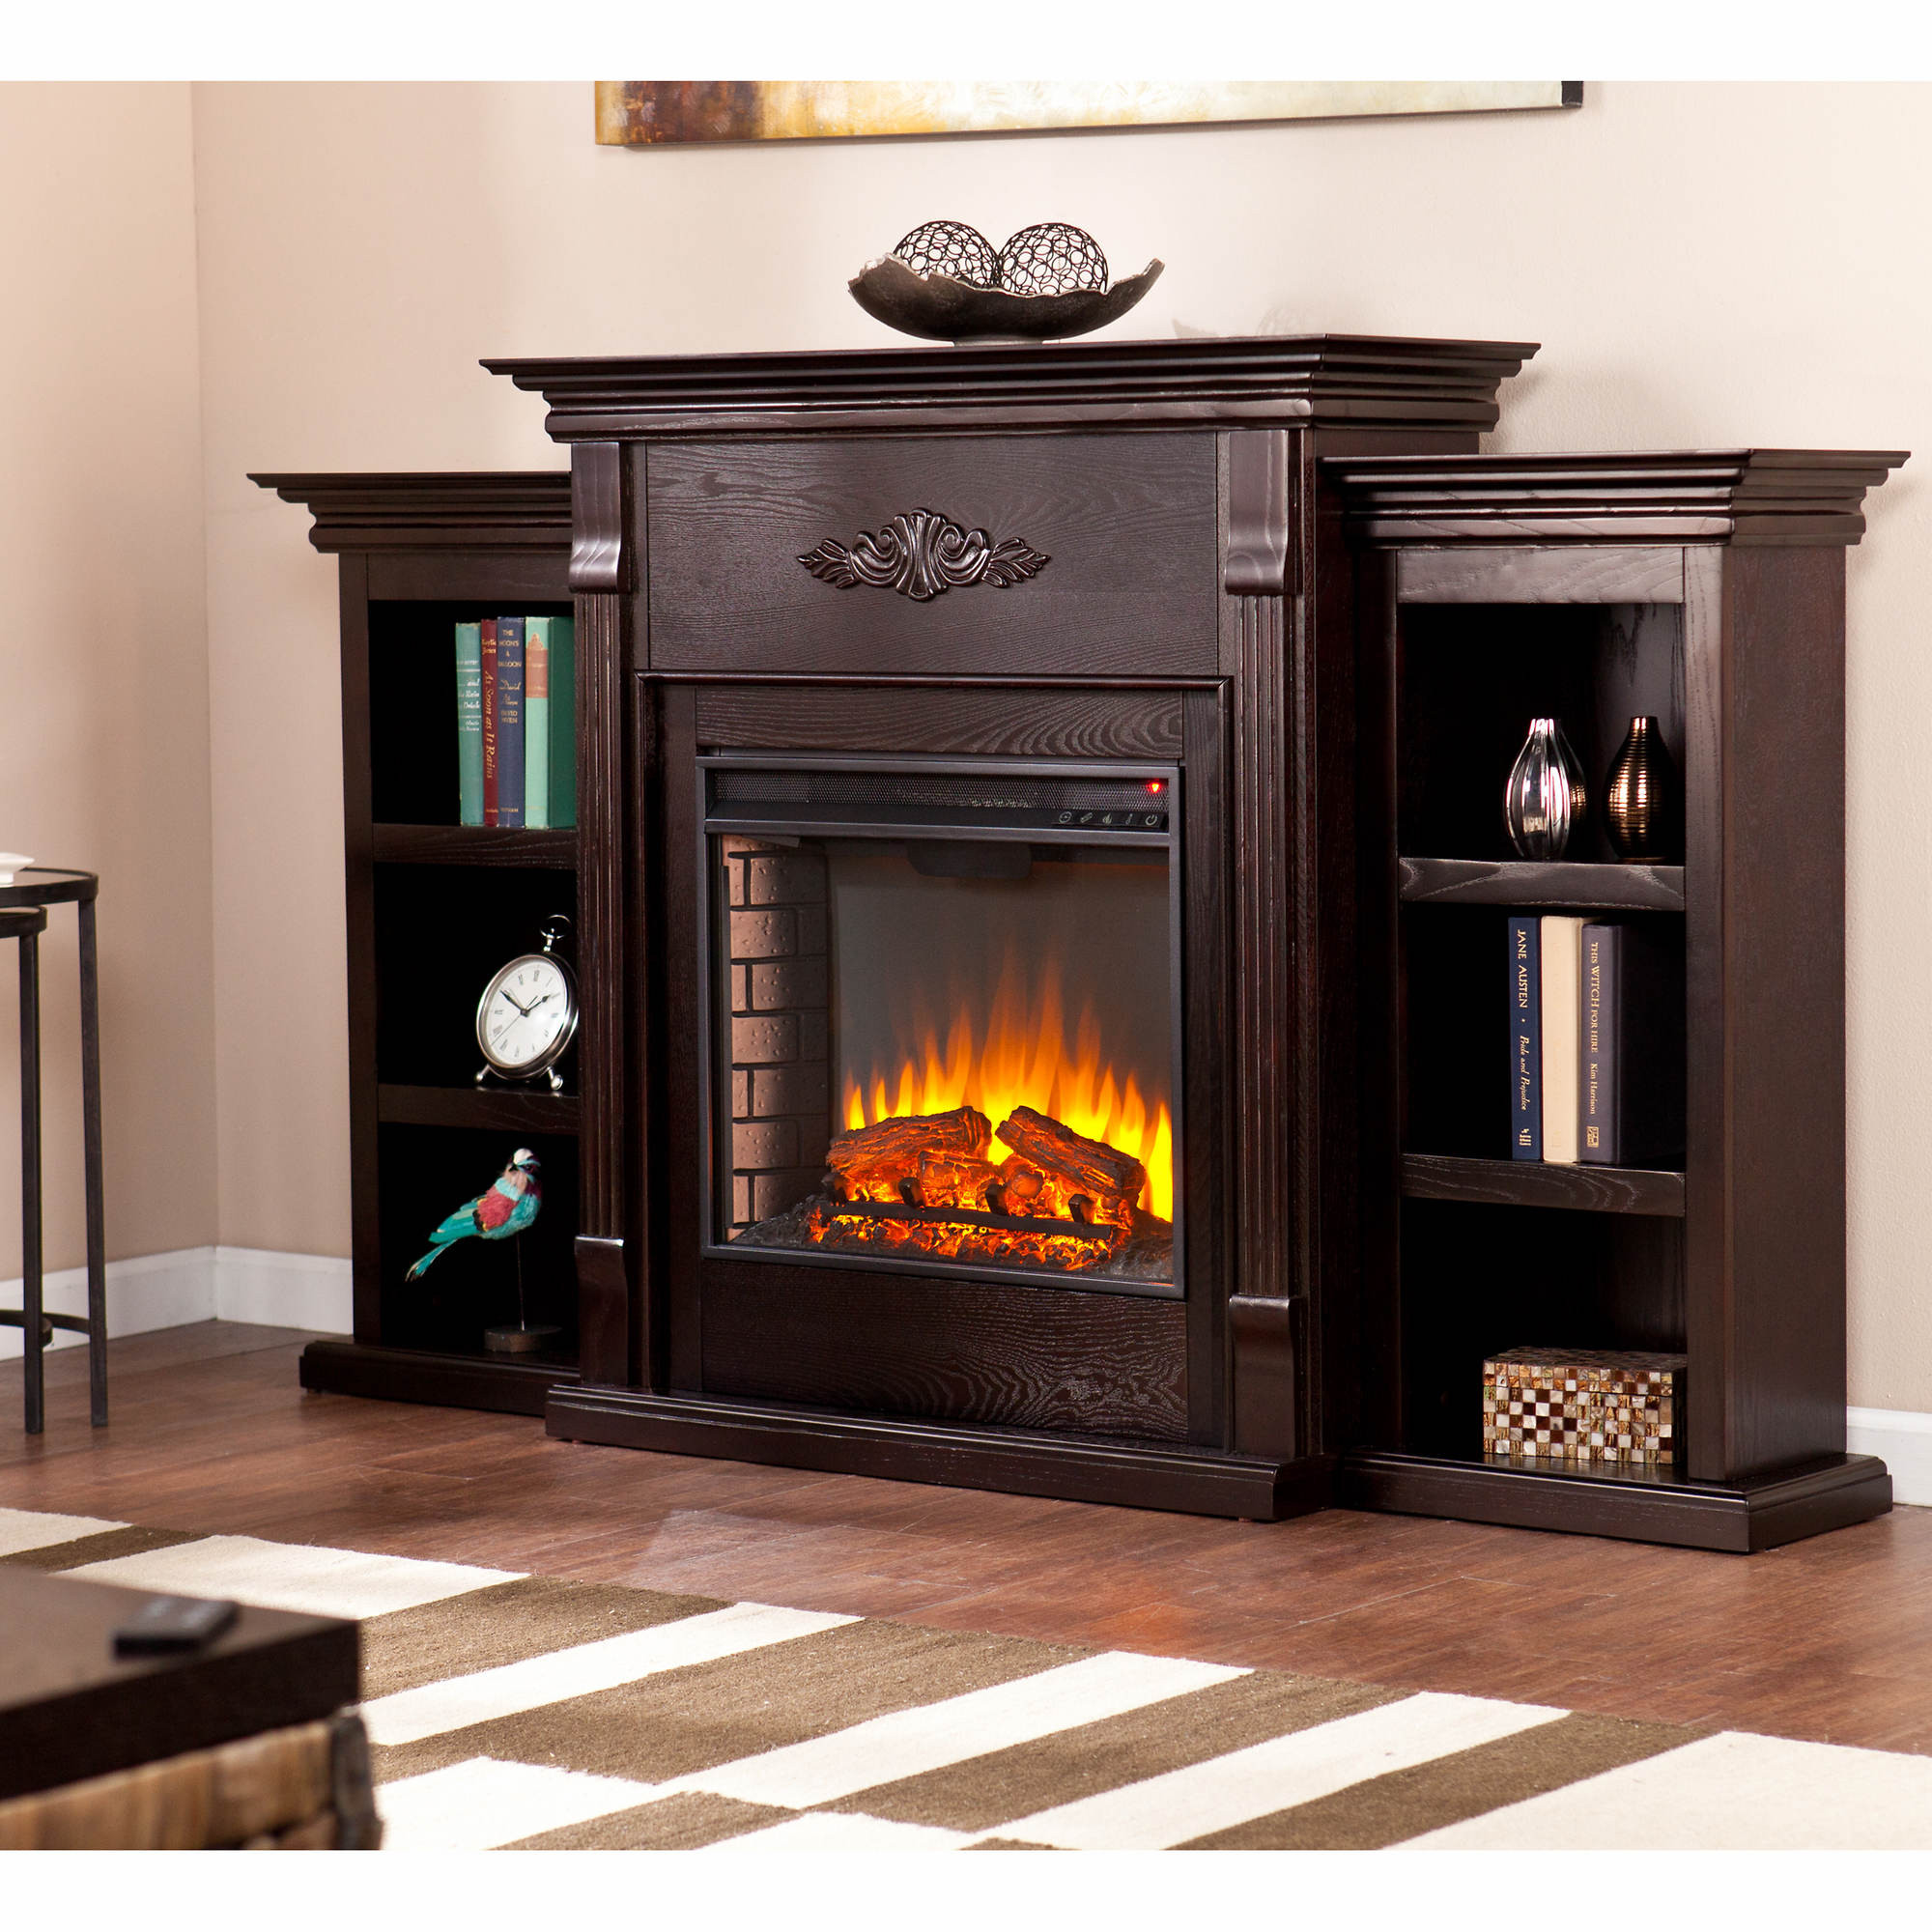 Bjs Electric Fireplace
 SEI Newport Electric Fireplace with Bookcases Classic